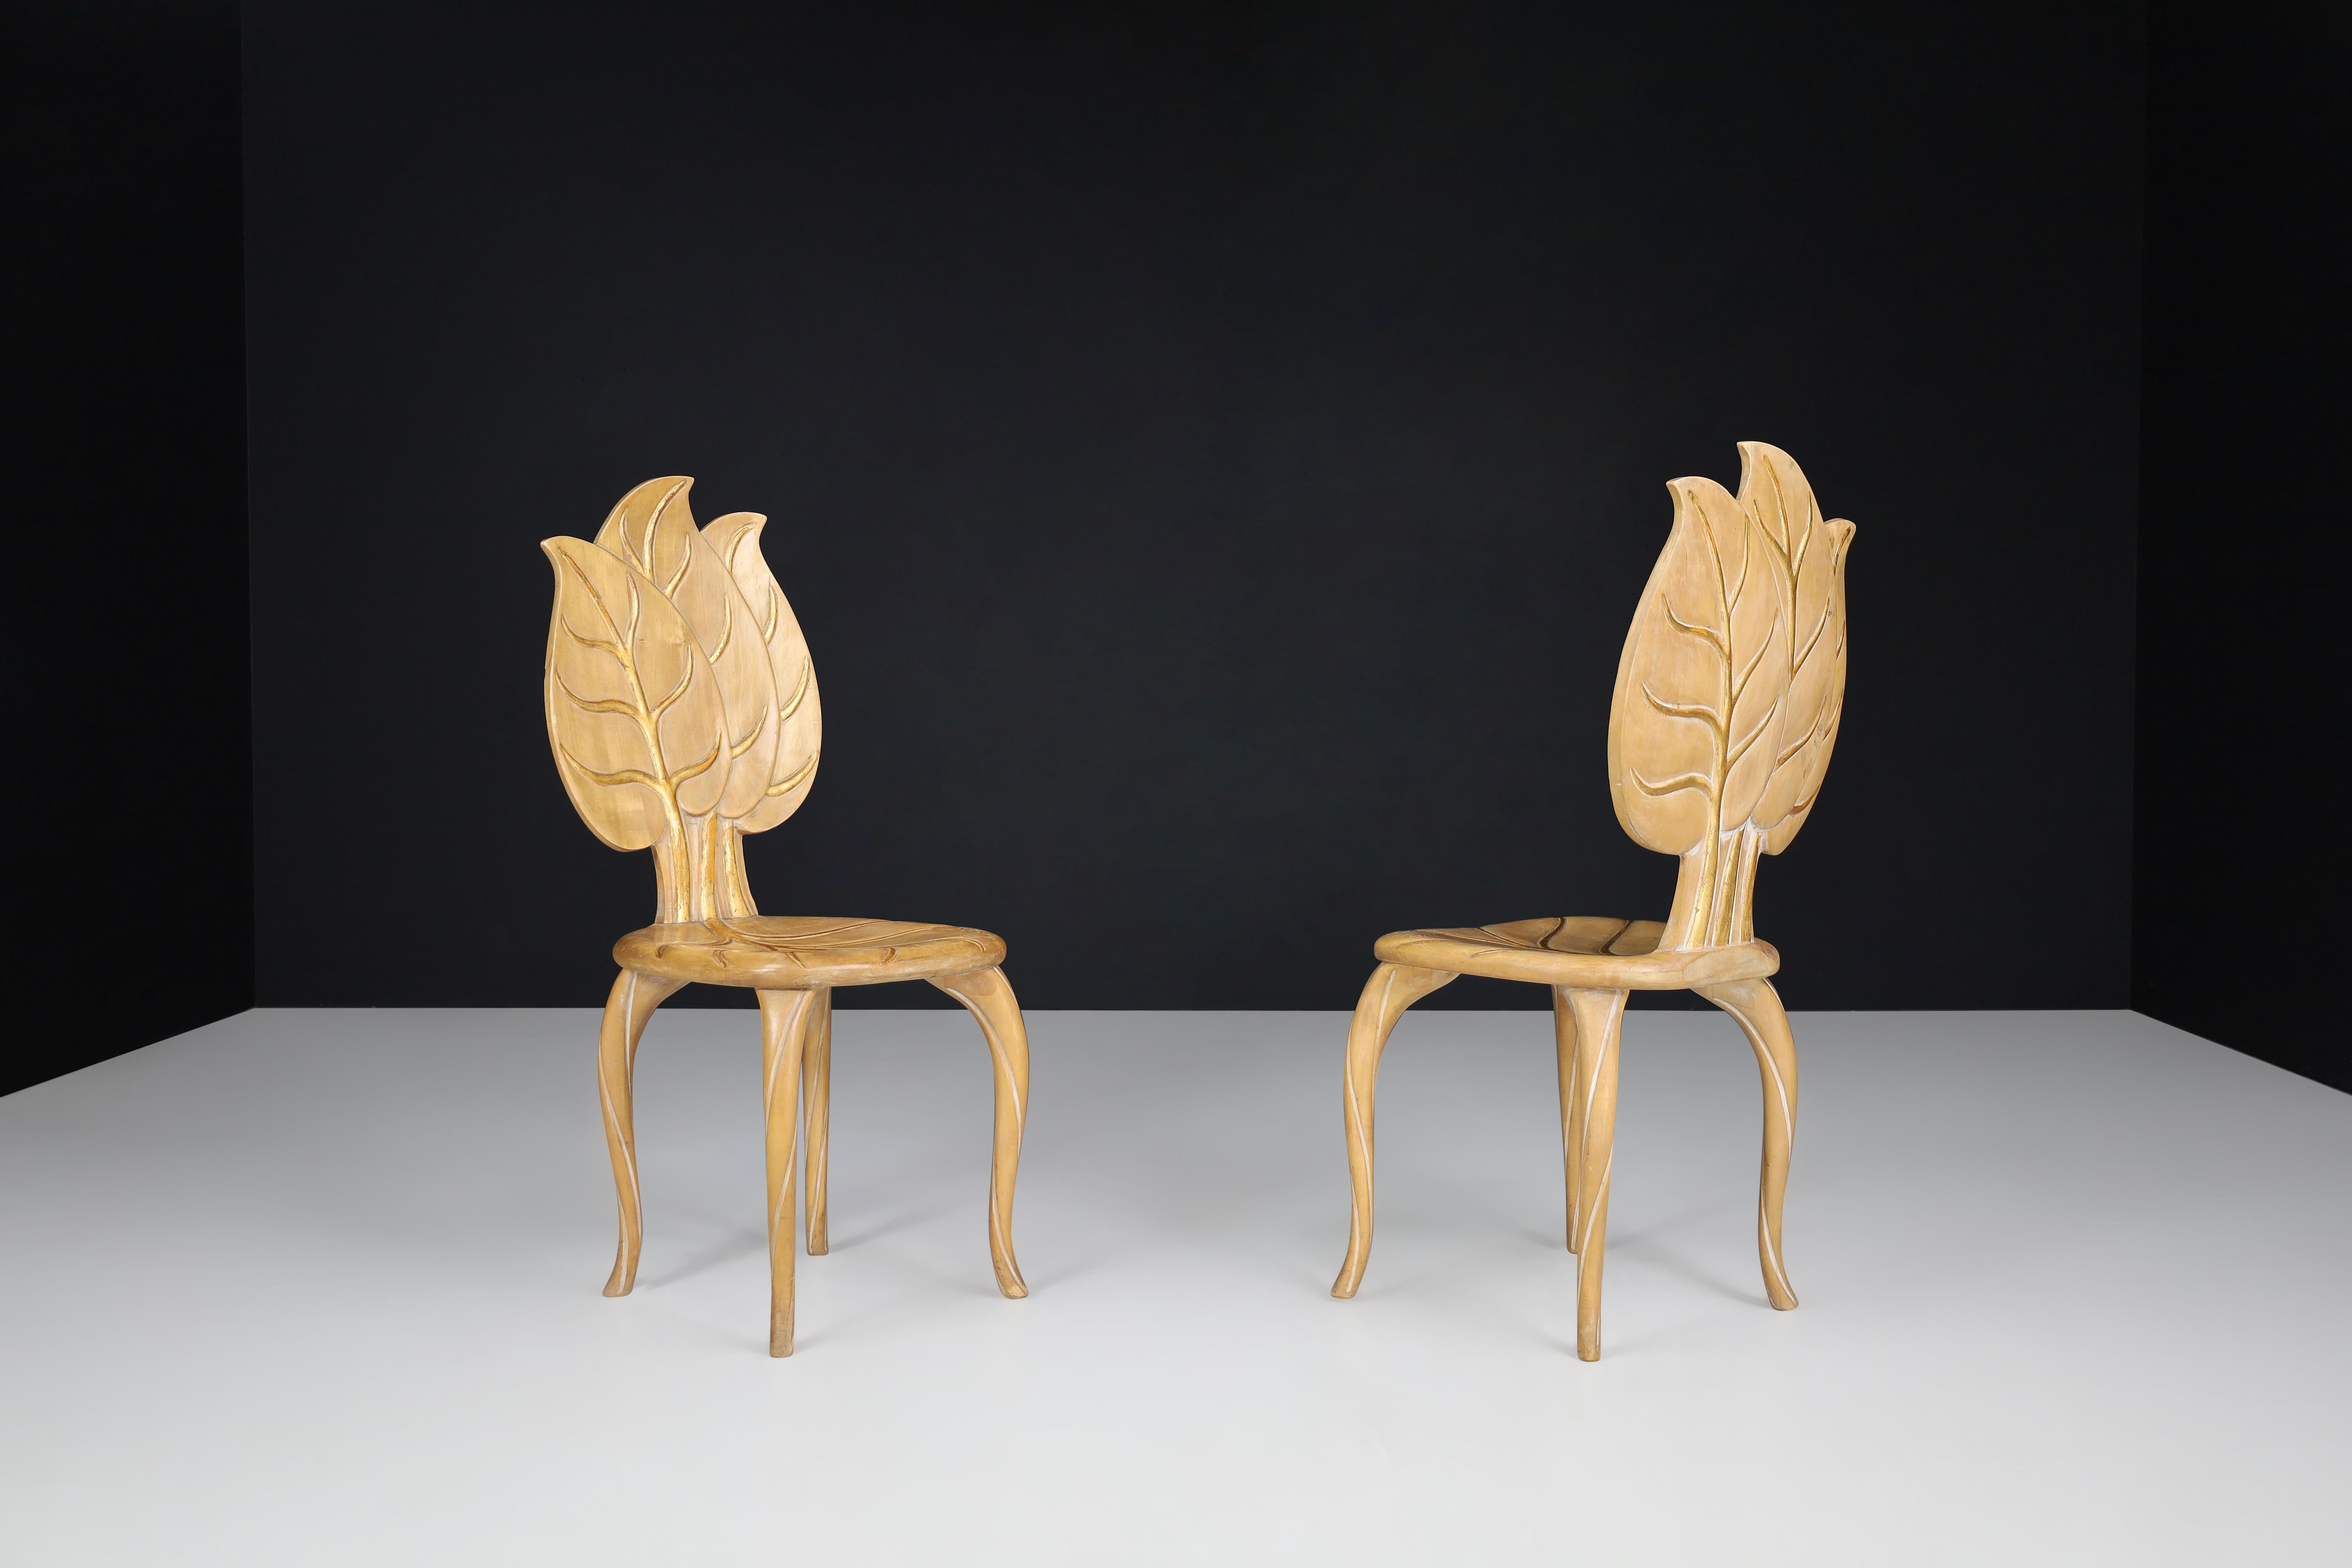 Beech Bartolozzi & Maioli Wooden and Gold Leaf Chairs, Italy, 1970s  For Sale